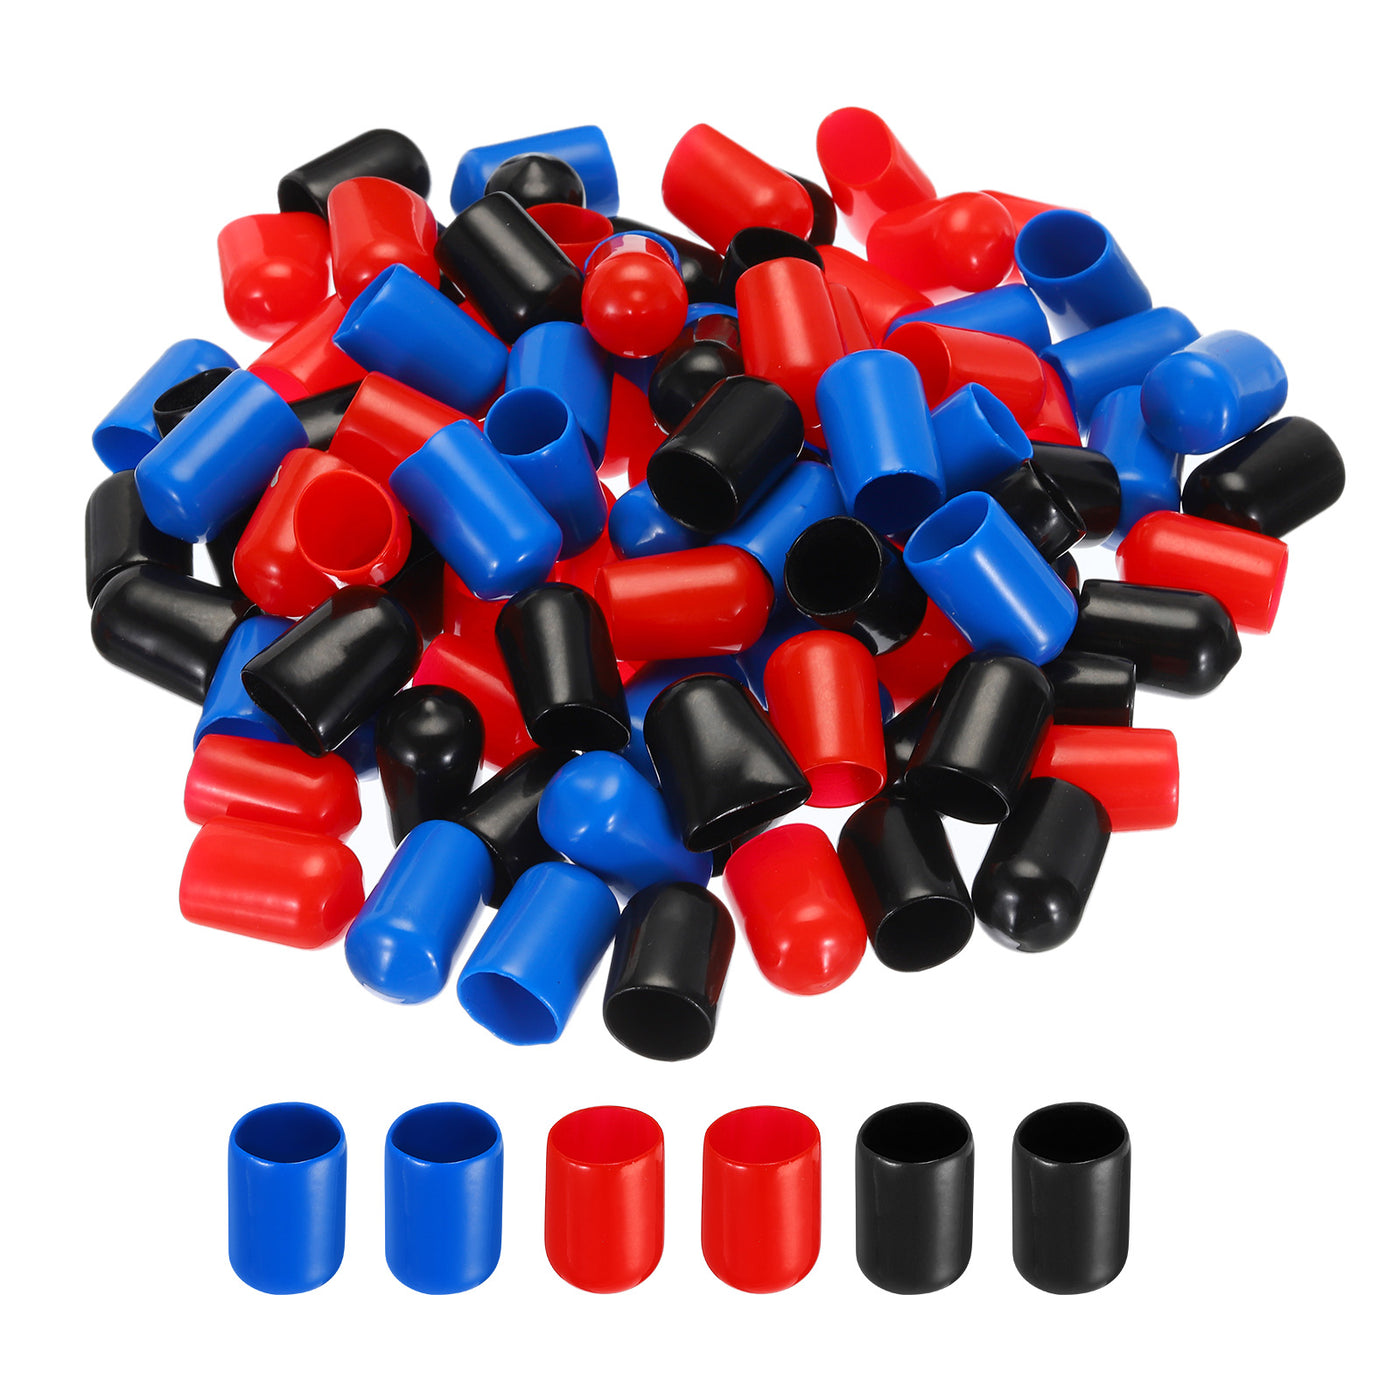 uxcell Uxcell 180pcs Rubber End Caps 13mm(1/2") ID Vinyl PVC Round Tube Bolt Cap Cover Screw Thread Protectors, Black Red Blue